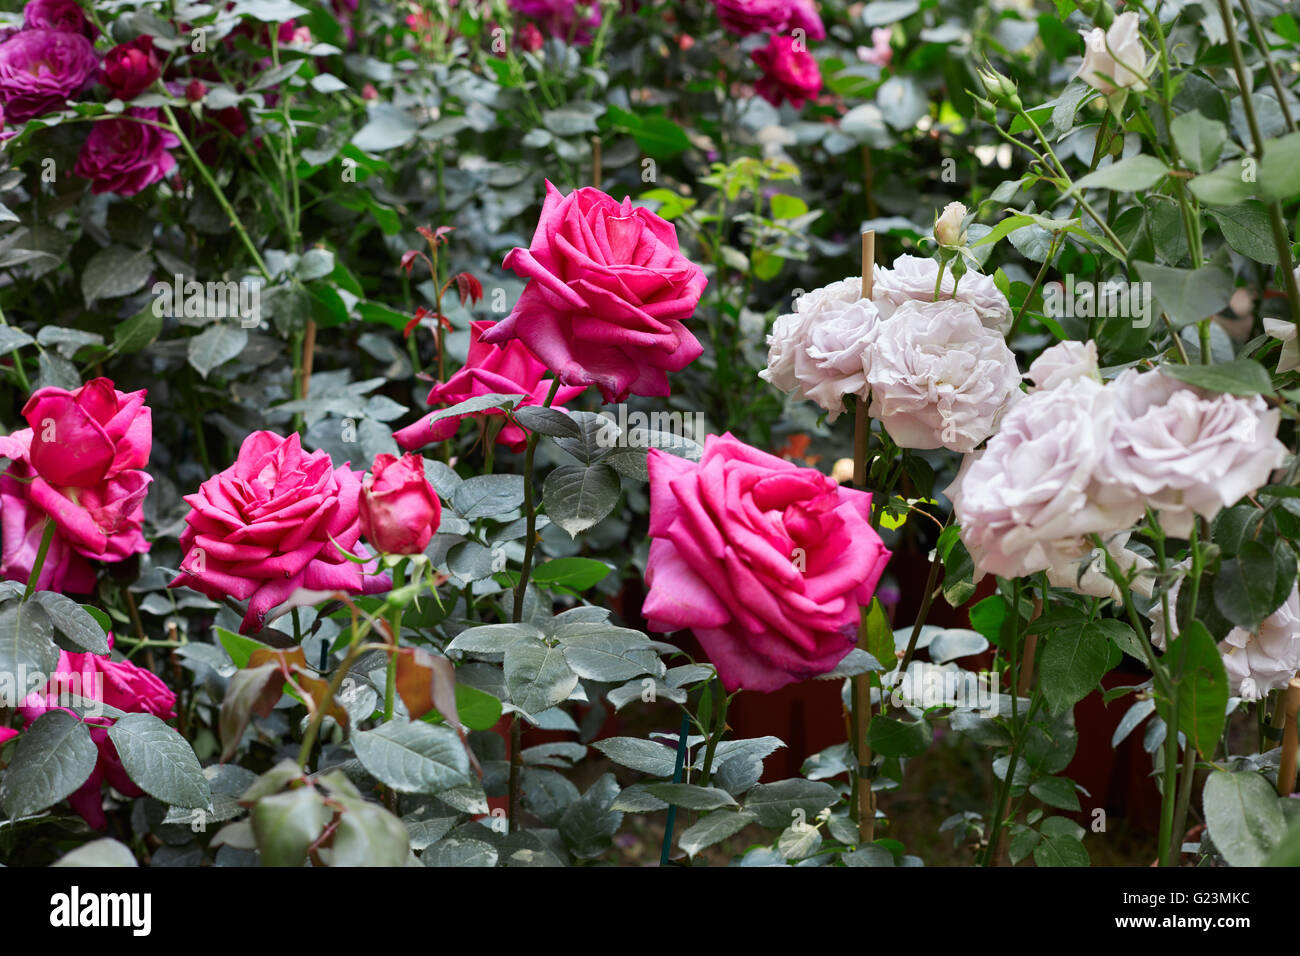 Rose garden with pink and white roses Stock Photo